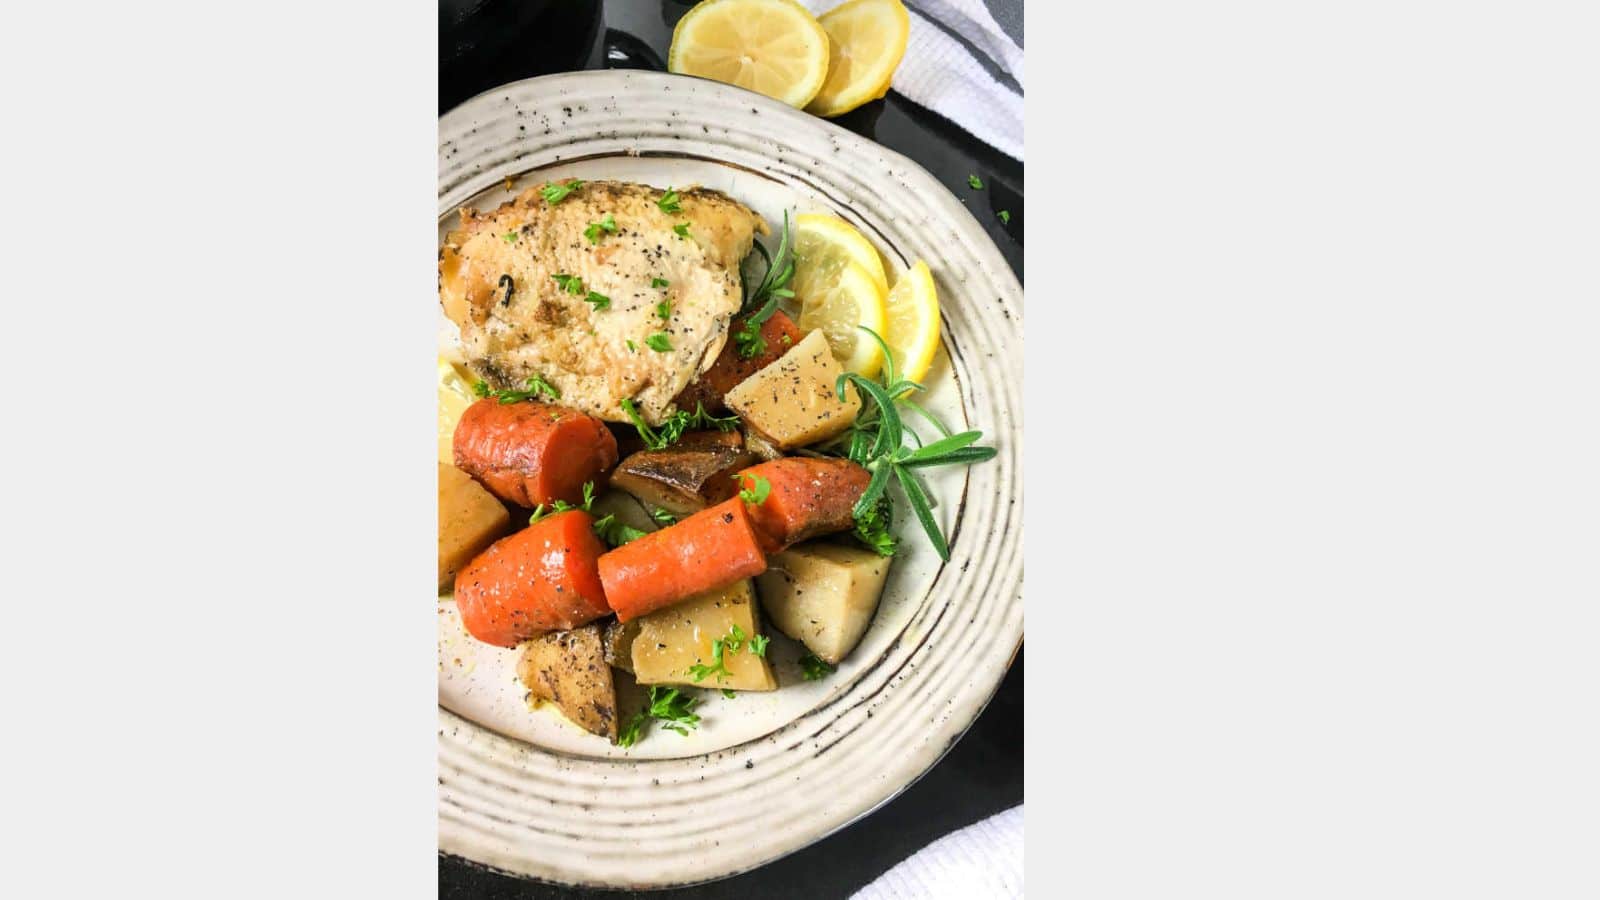 rosemary chicken on a plate with veggies